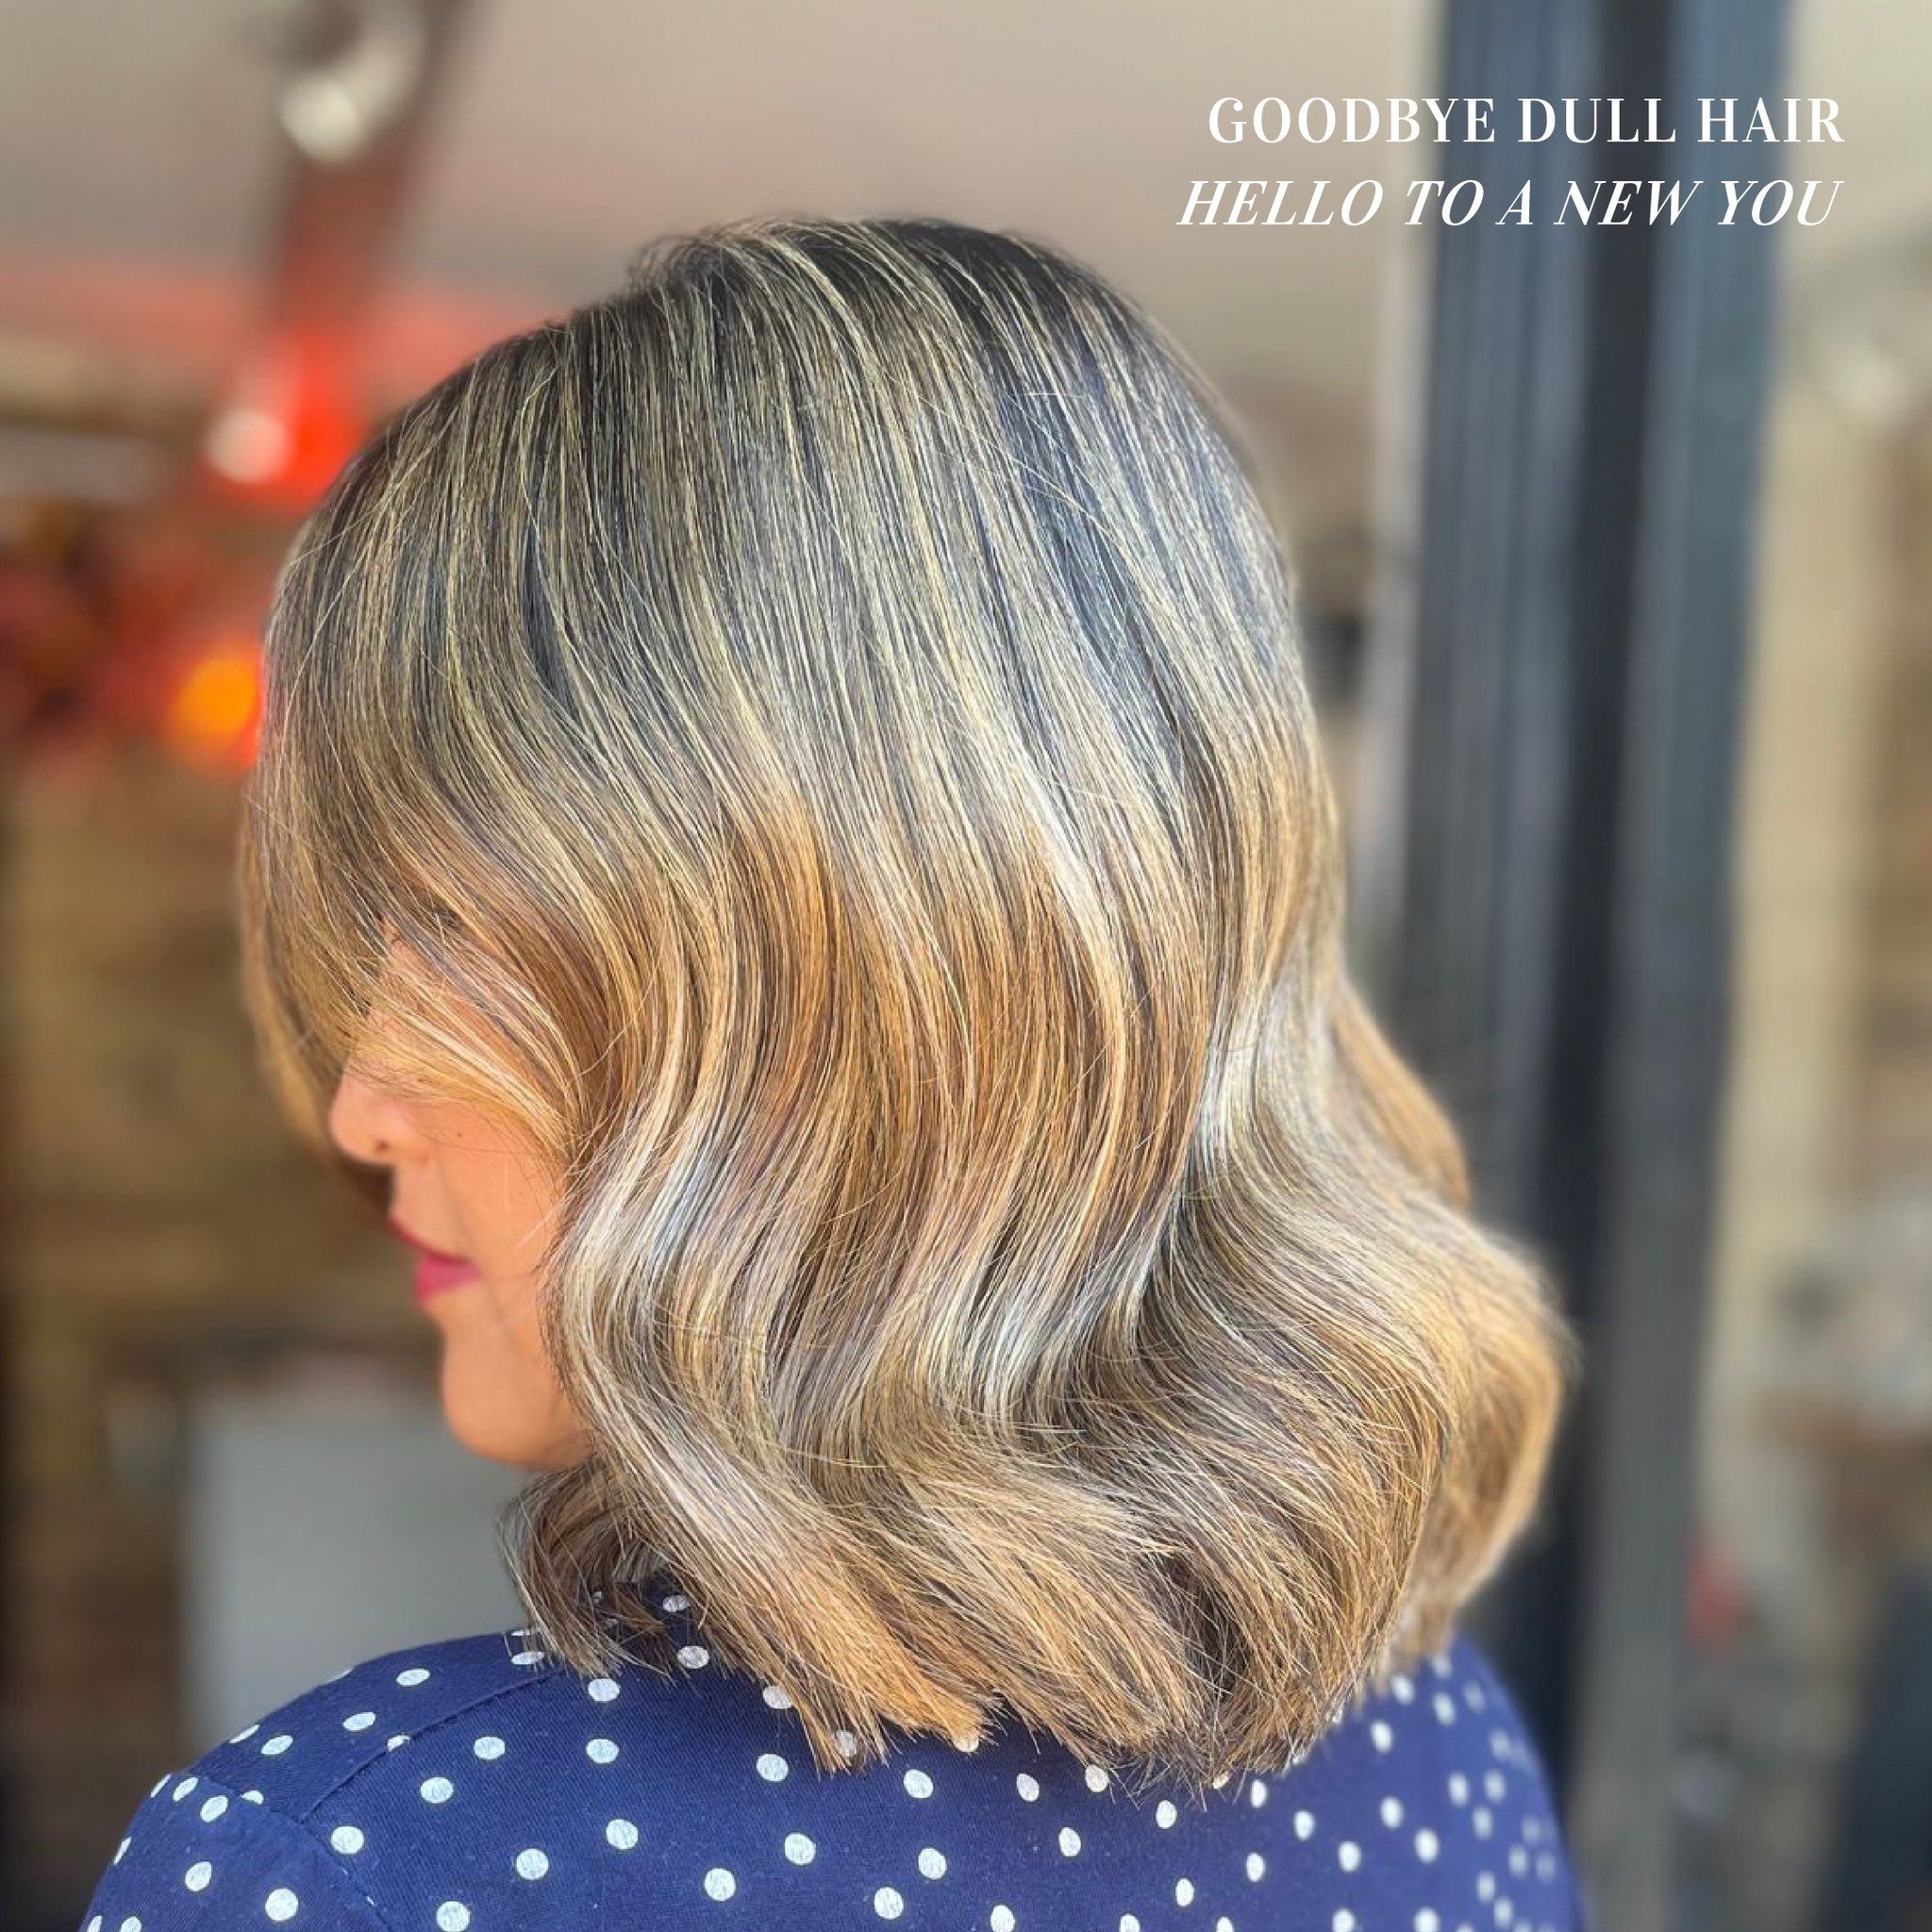 Transform into the best version of yourself with Joshua Luke's 💇&zwj;♀️✨

Our expert colourists will help you elevate your look and unleash your hair's full potential 🌈 Is it time to reflect your unique style and personality? 🙌

Then book your app